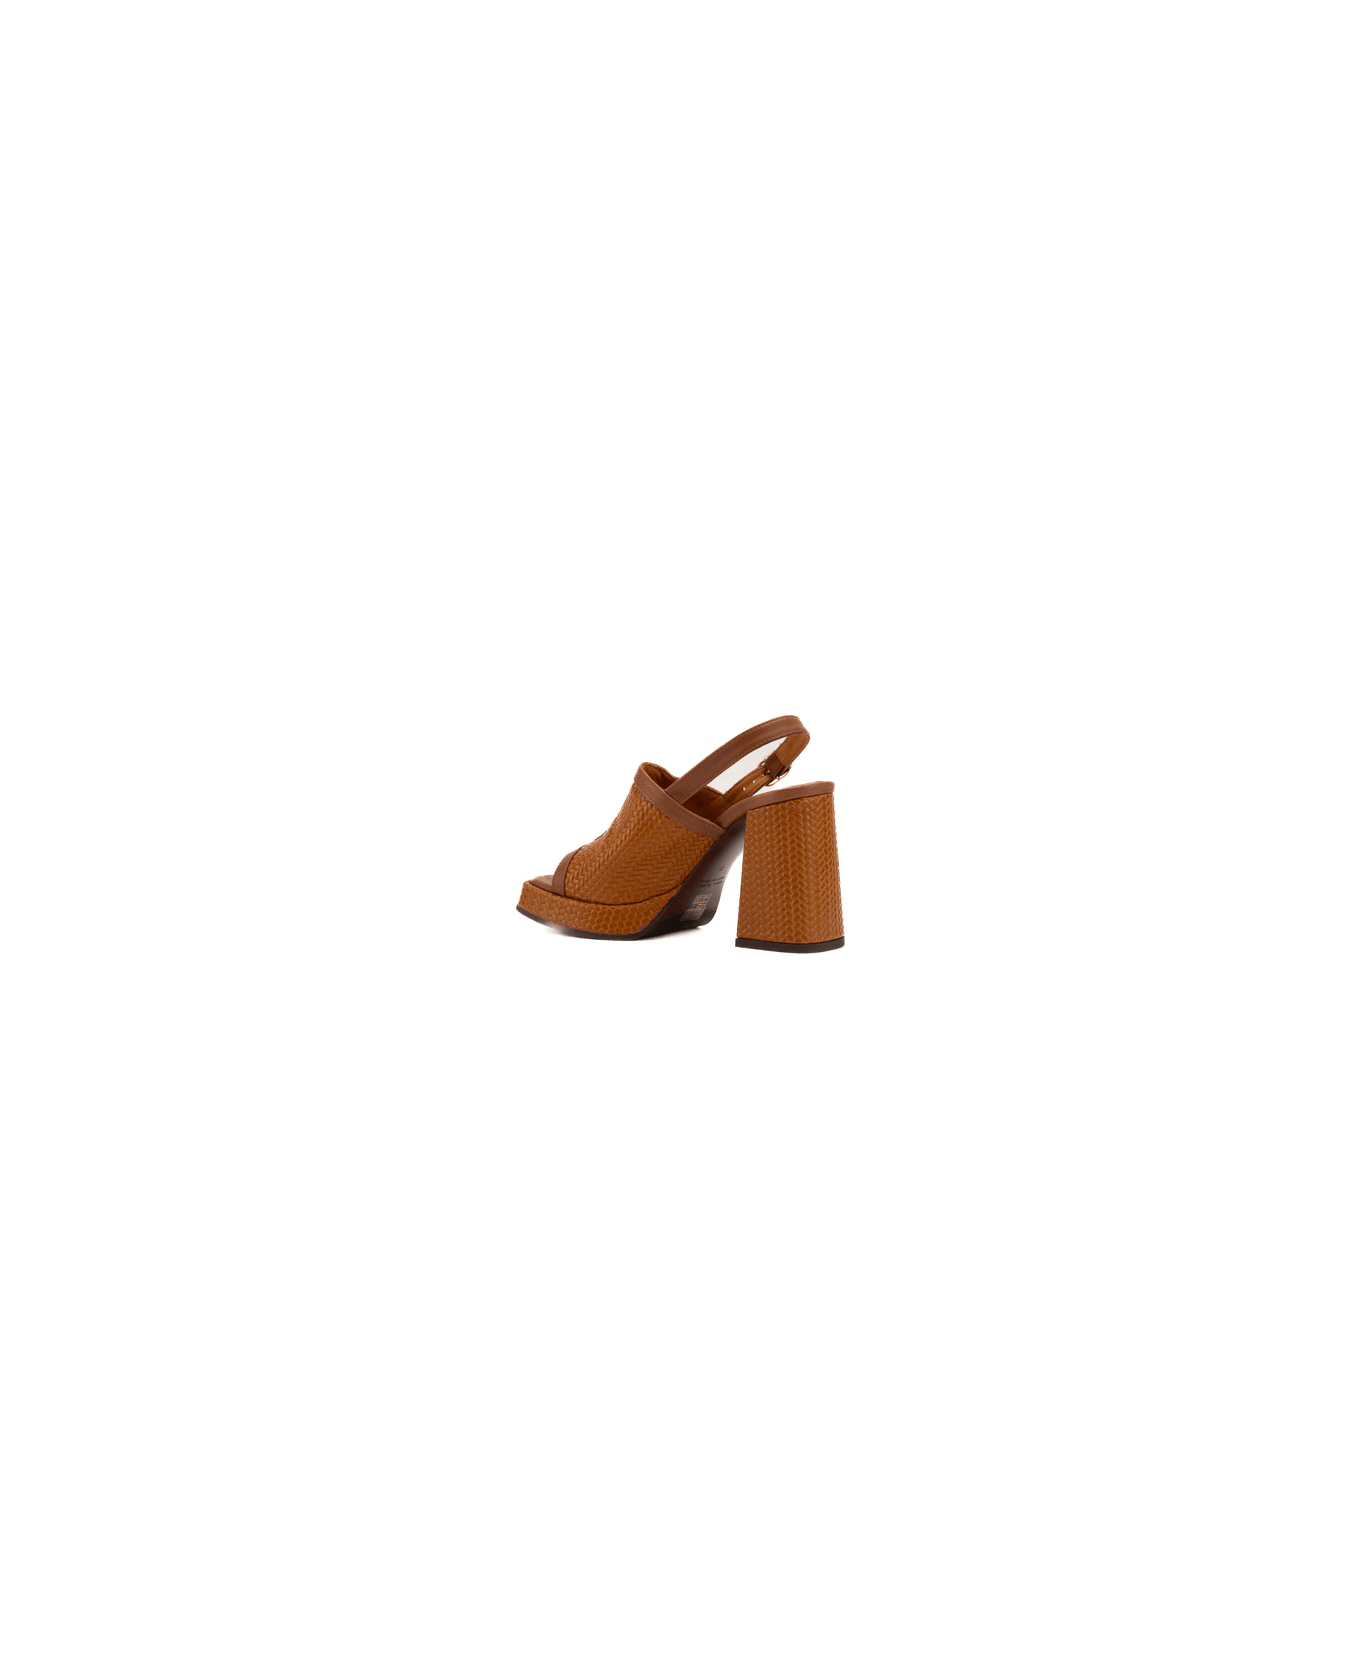 Chie Mihara Zimi Sandals In Woven Effect Leather - Cognac サンダル